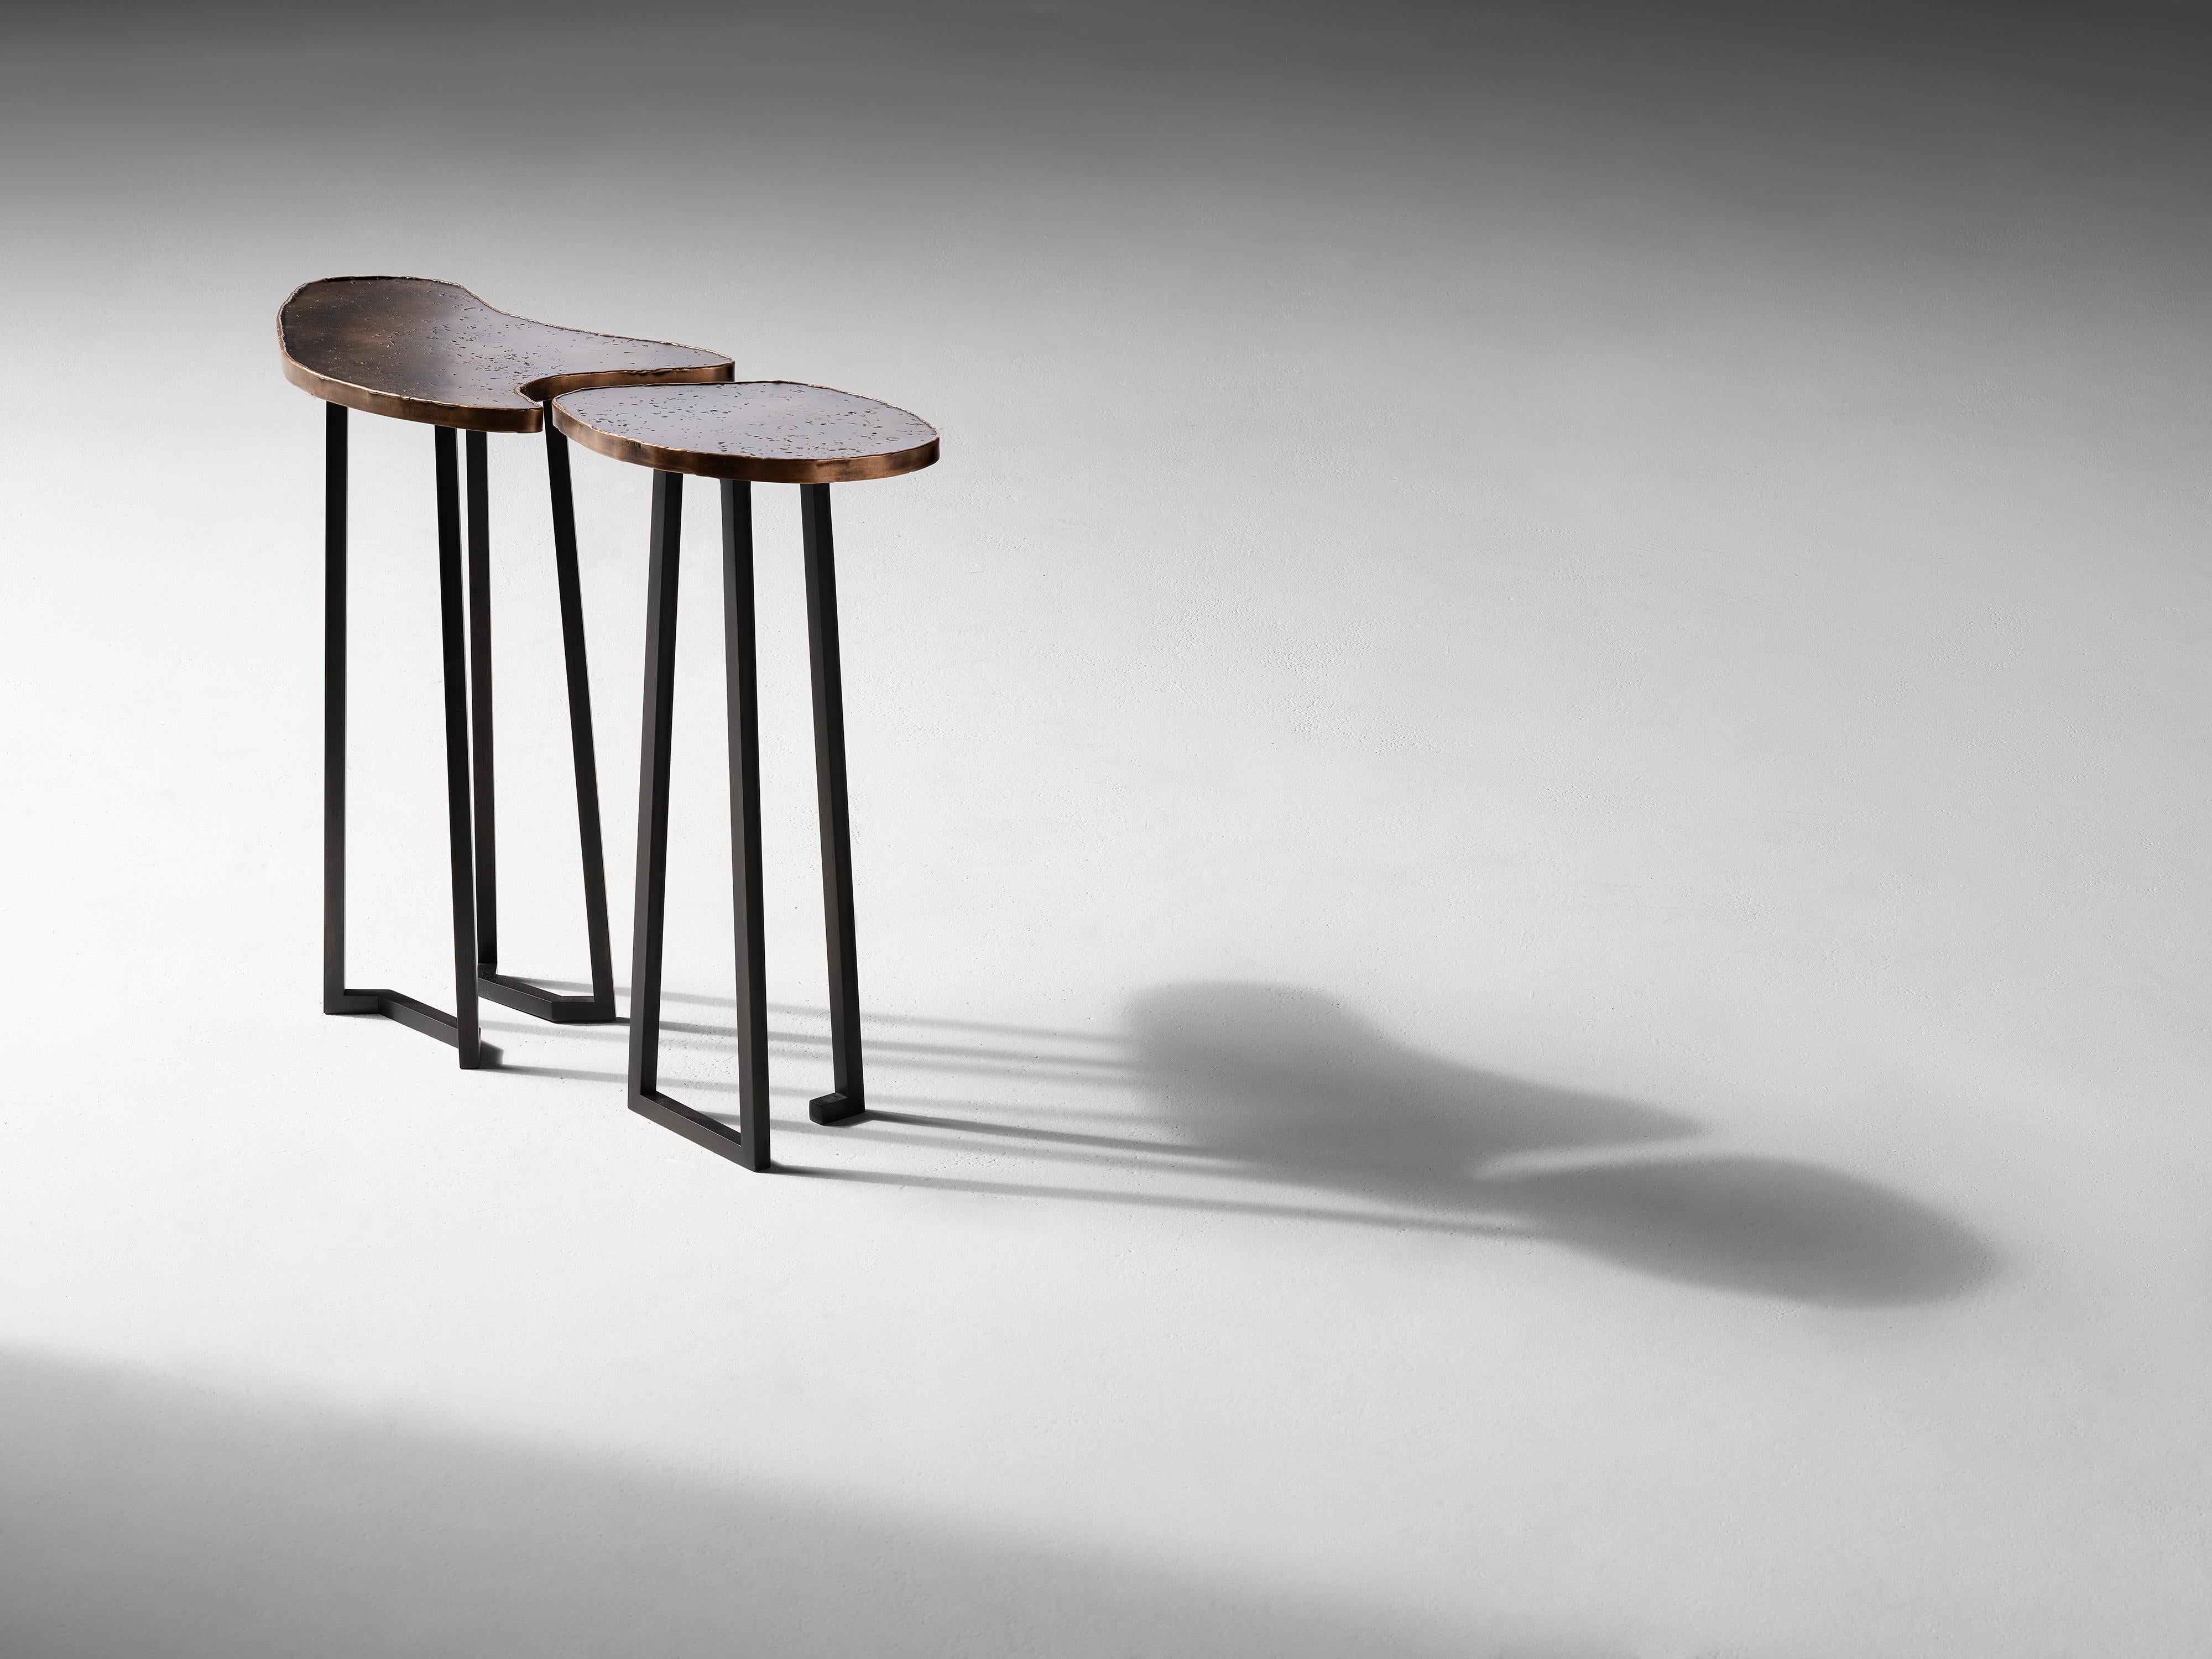 Contemporary Douglas Fanning, Set of Conjoining Bronze Cocktail Tables, United States, 2020 For Sale